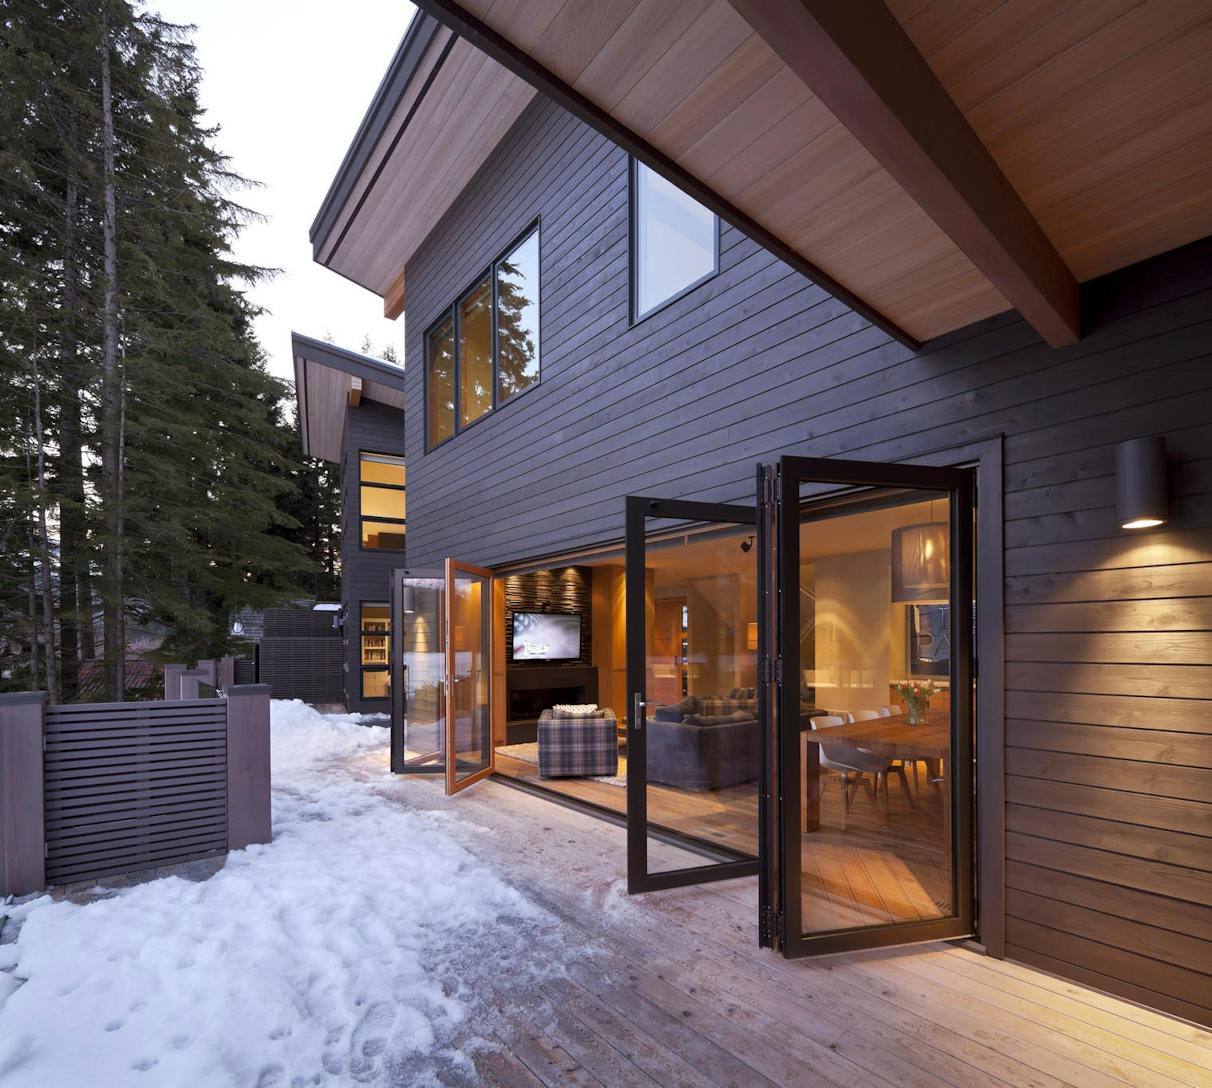 NW Clad 740 Folding patio doors performing on snow - closed exterior